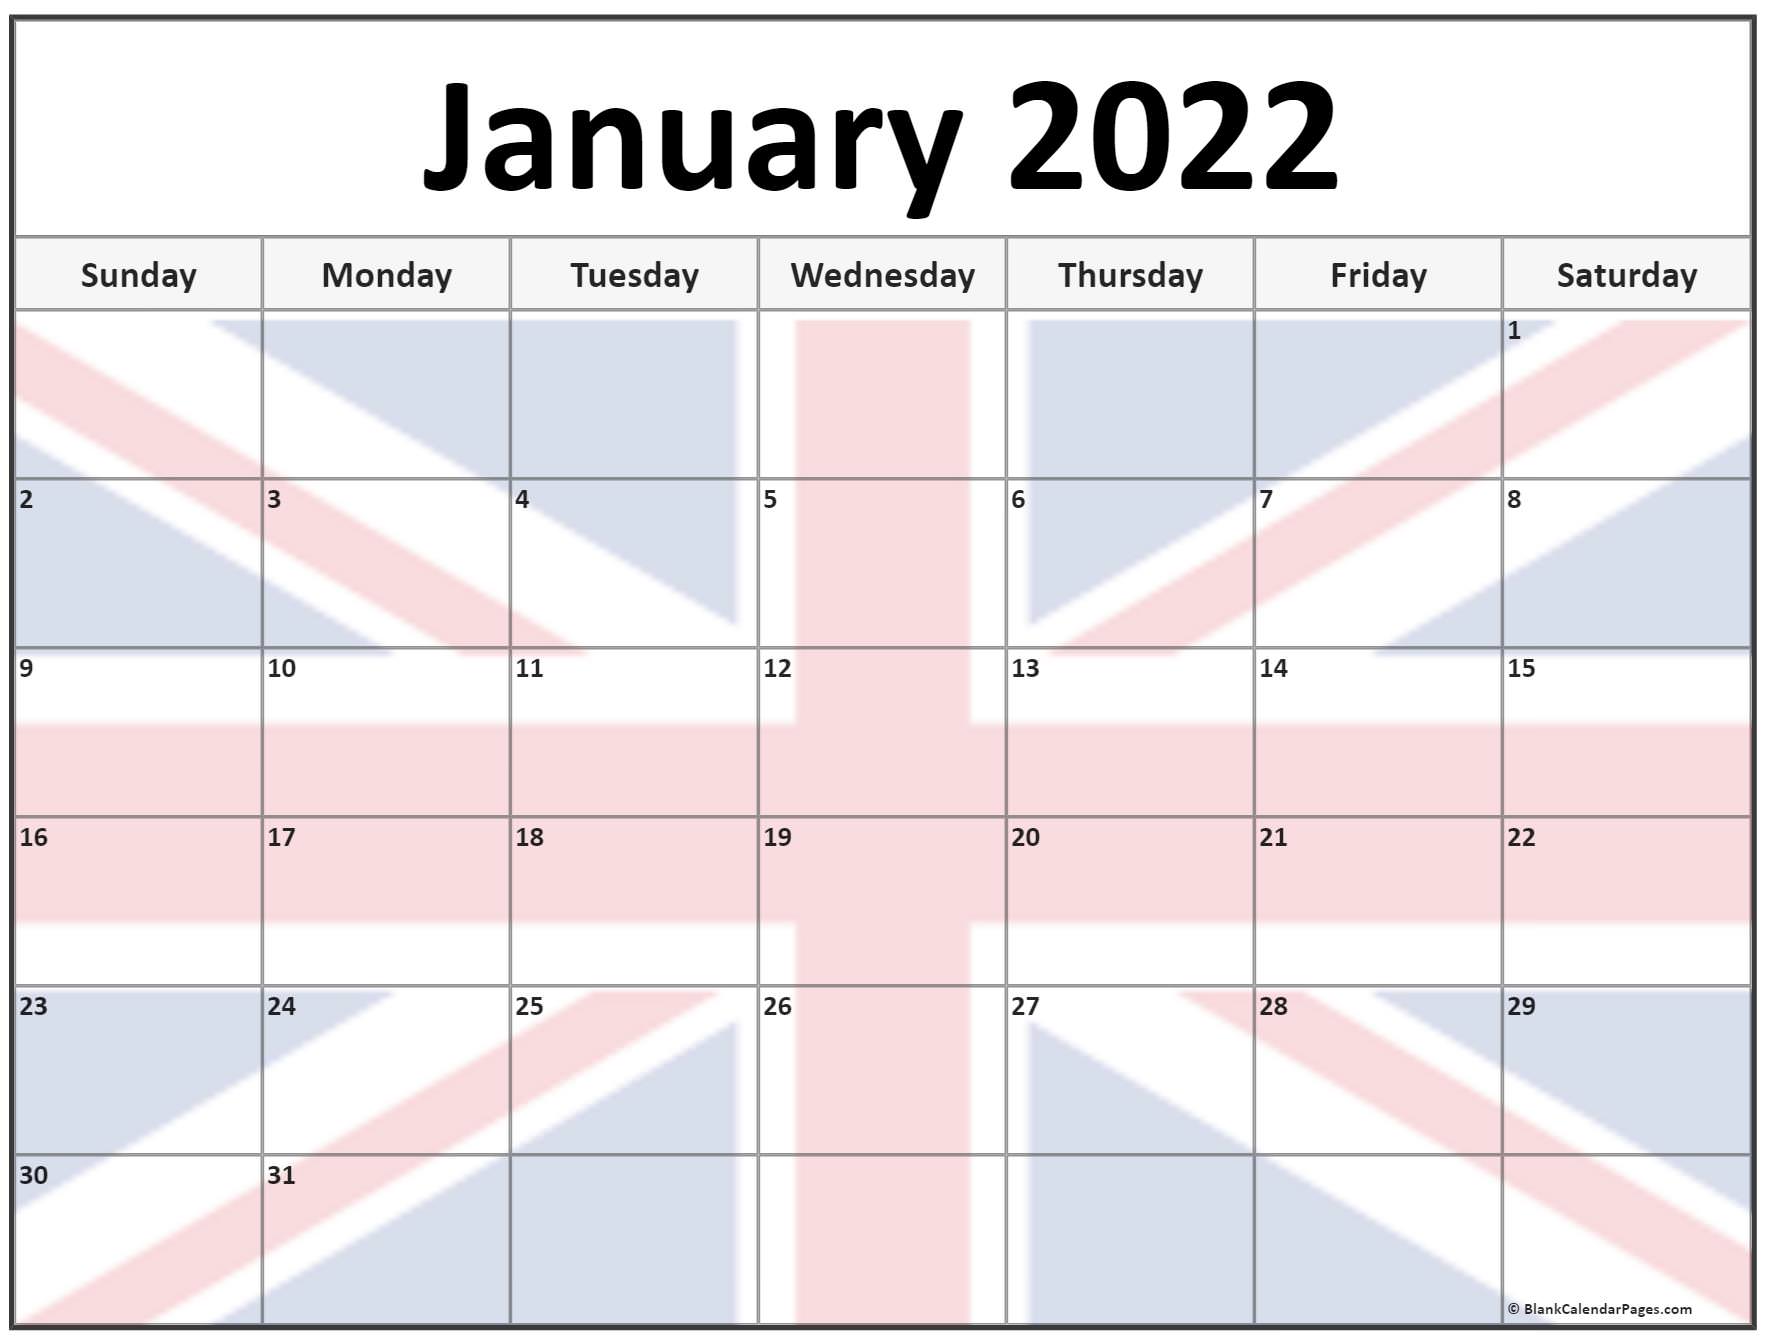 Collection of January 2022 photo calendars with image filters.